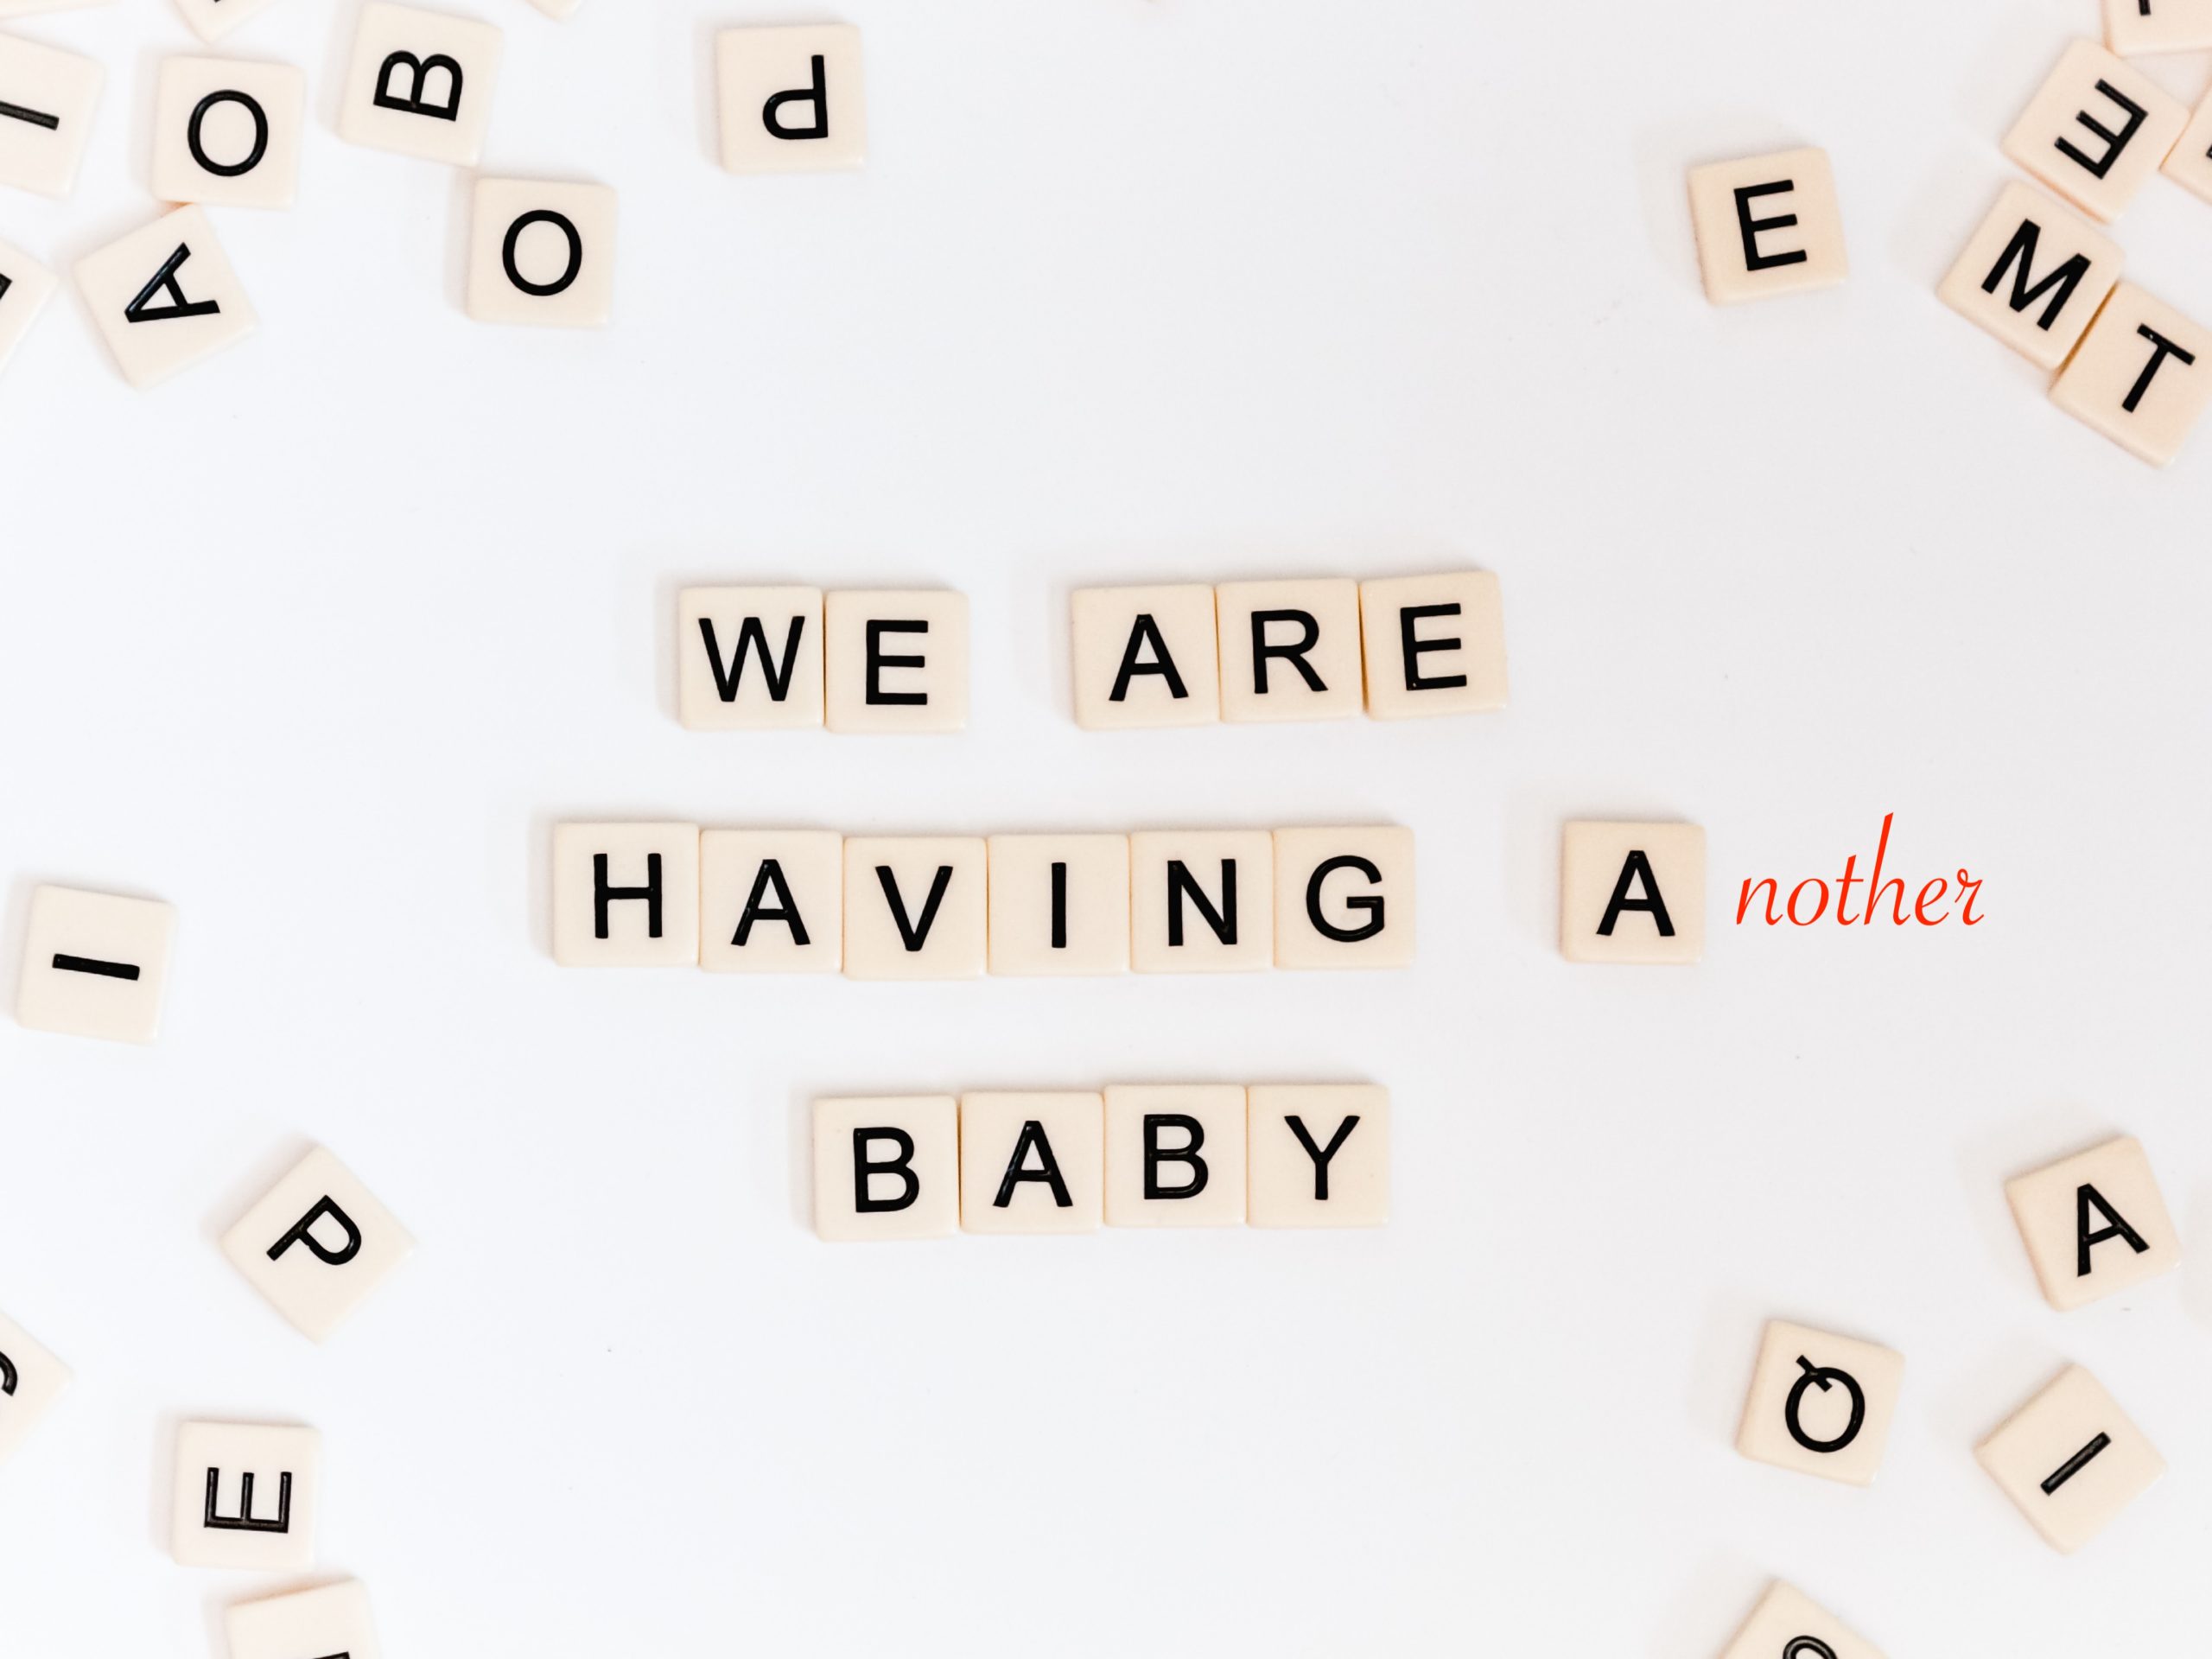 scrabble letters spell out, "We are having another baby"